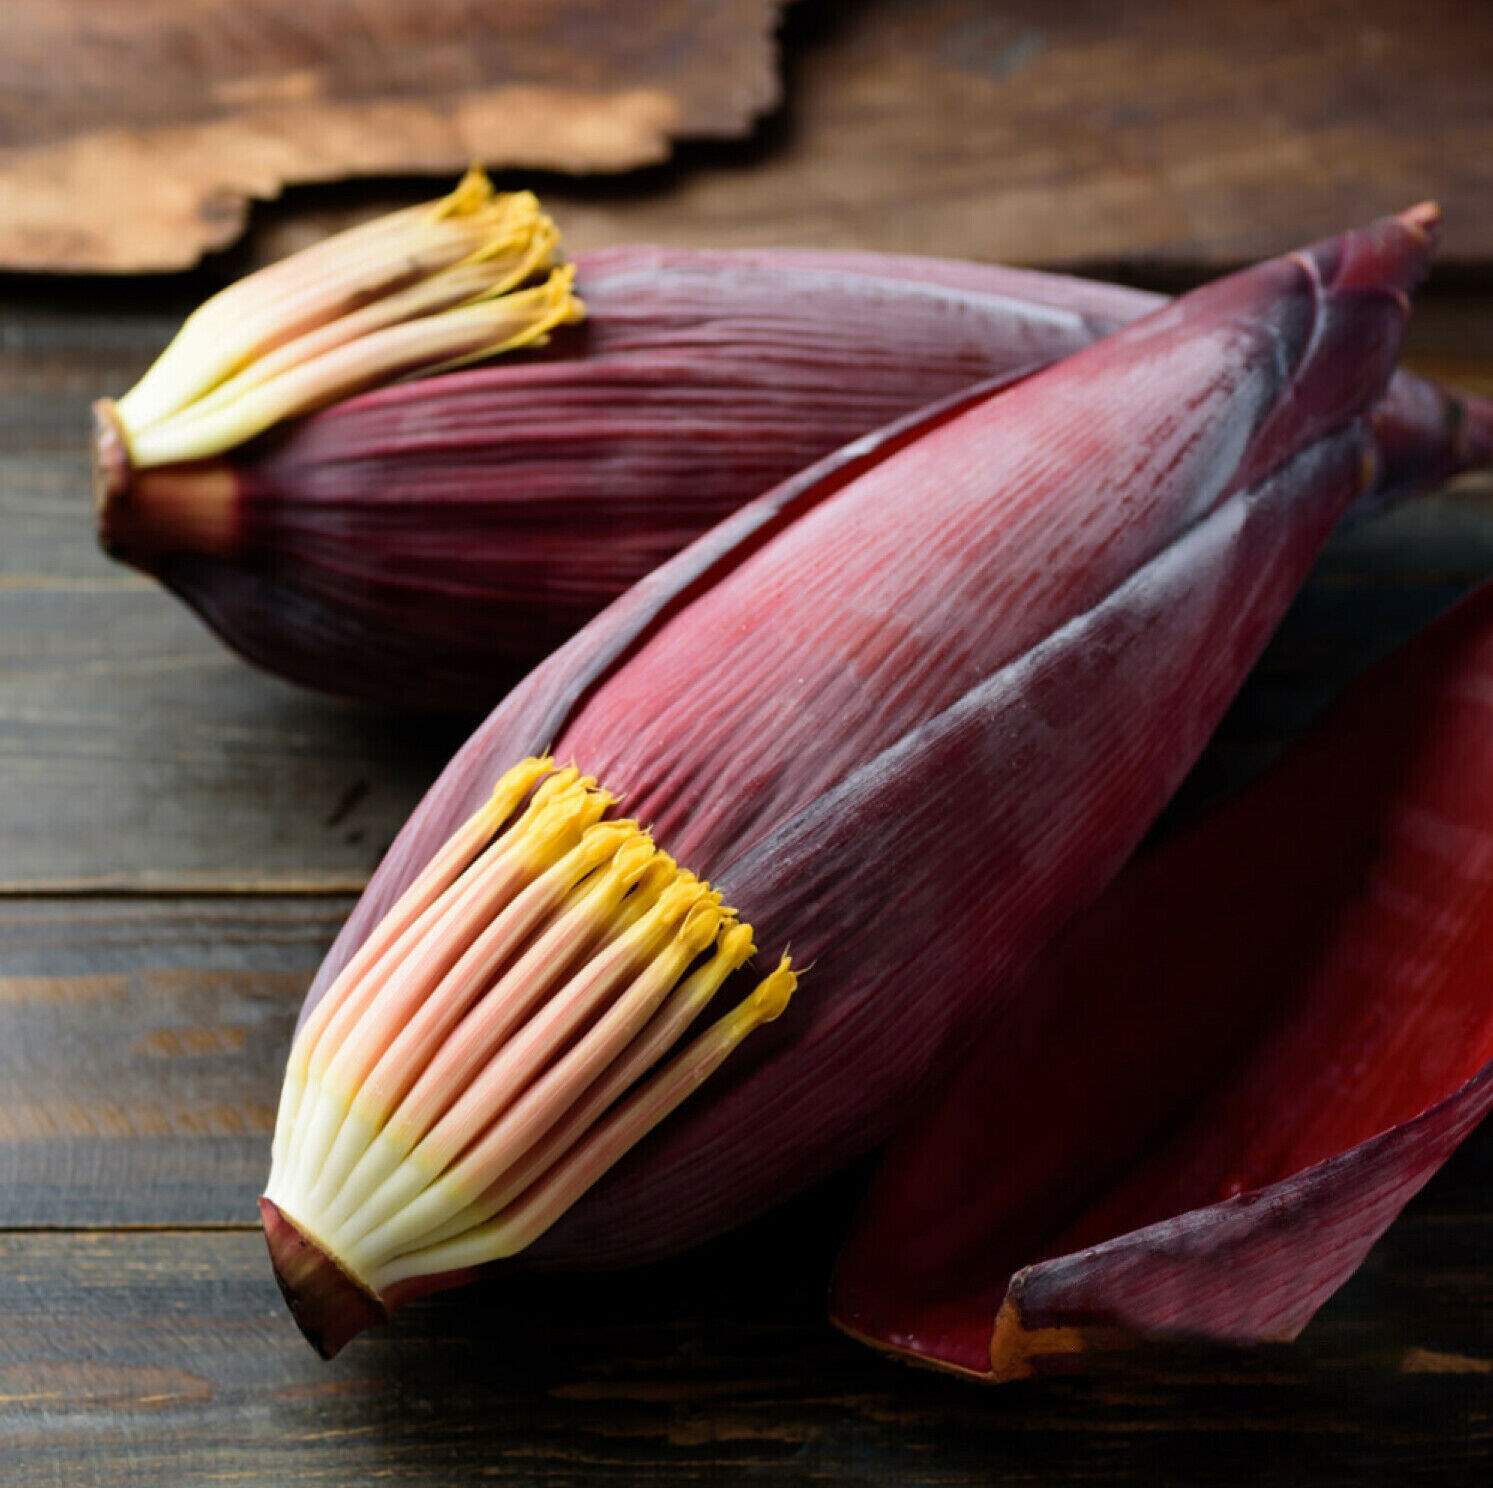 Banana flower helps to fight against gut cancer